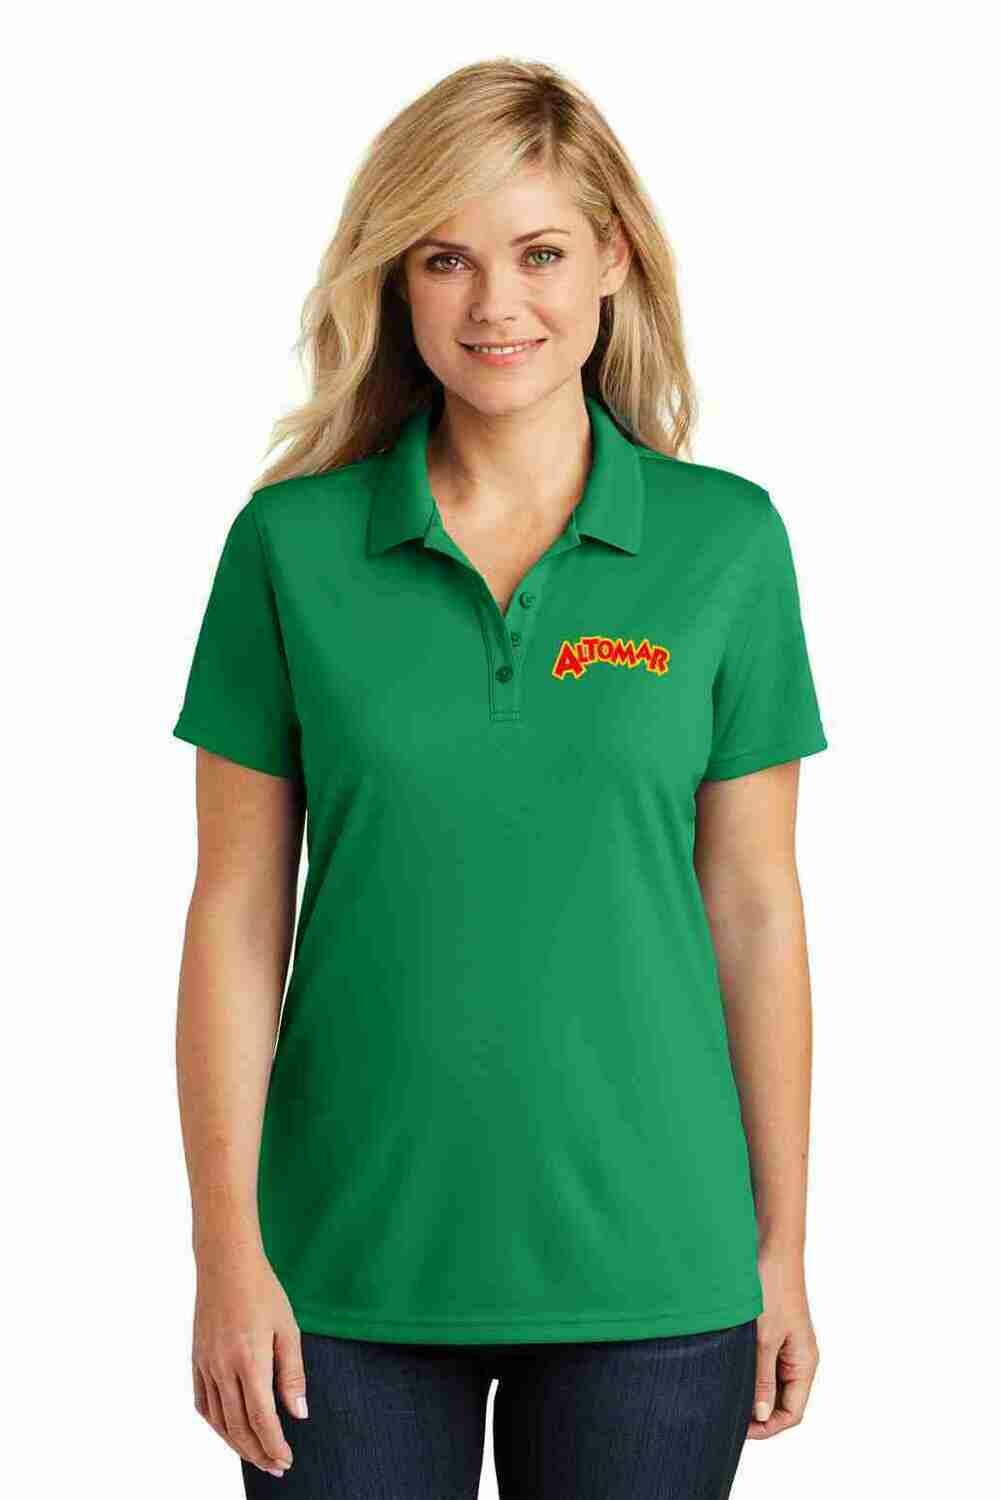 Altomar Bright Kelly Green Embroidered Polo